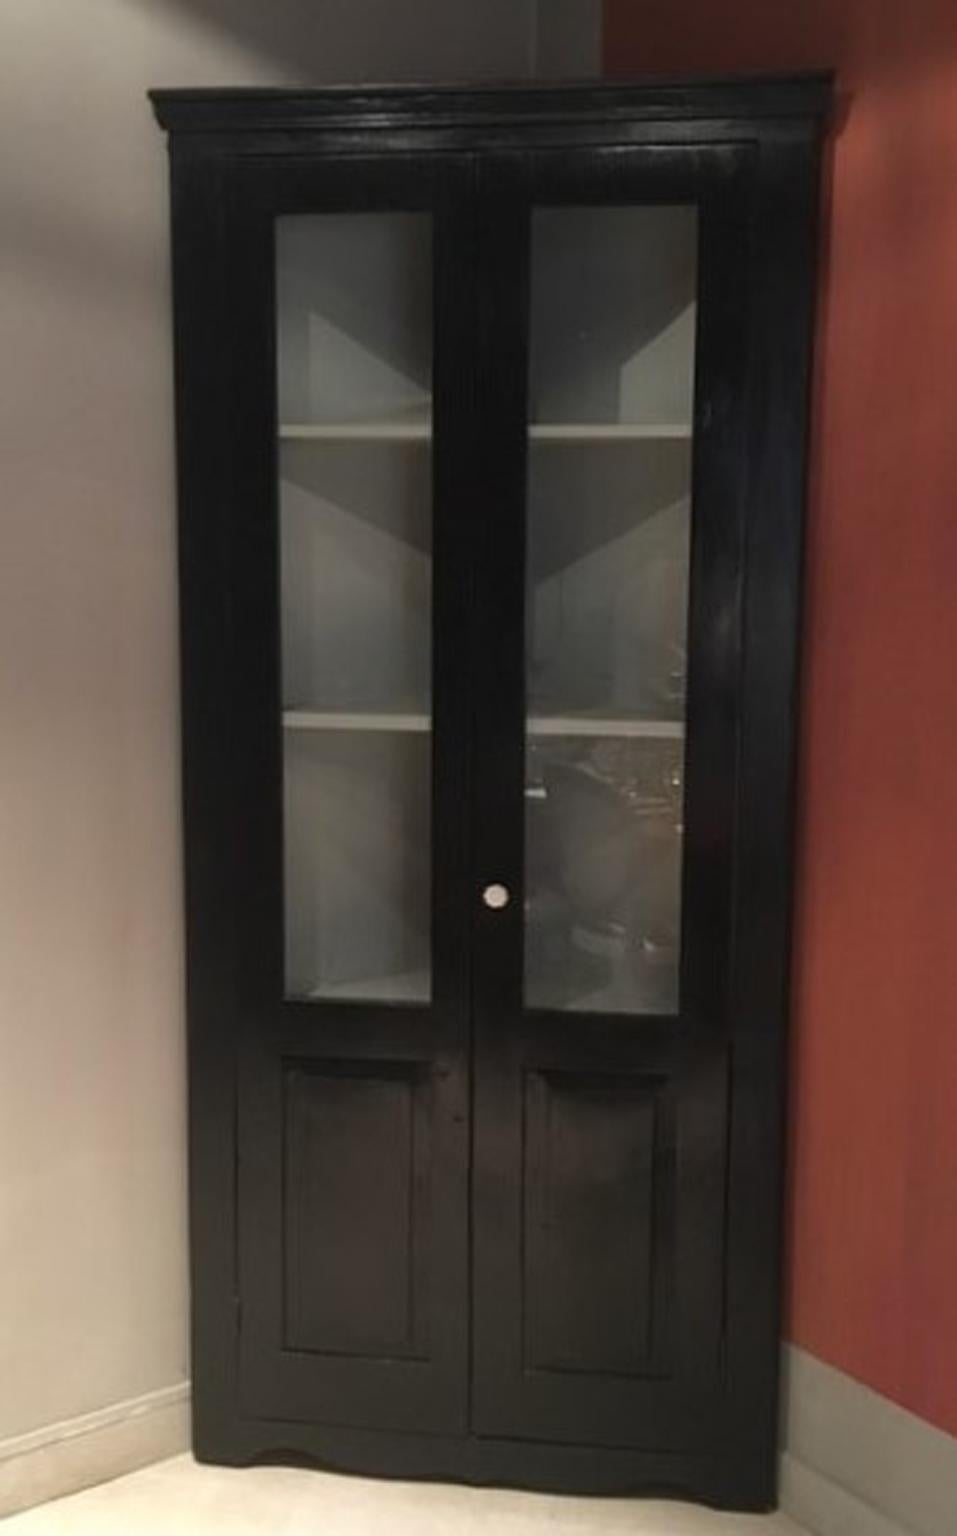 This rustic corner cupboard is totally handmade in pine wood and it becomes a contemporary presence in an elegant kitchen, for its trendy black color.
Inside, there is a wallpaper in light green mint color that creates a beautiful contrast with the